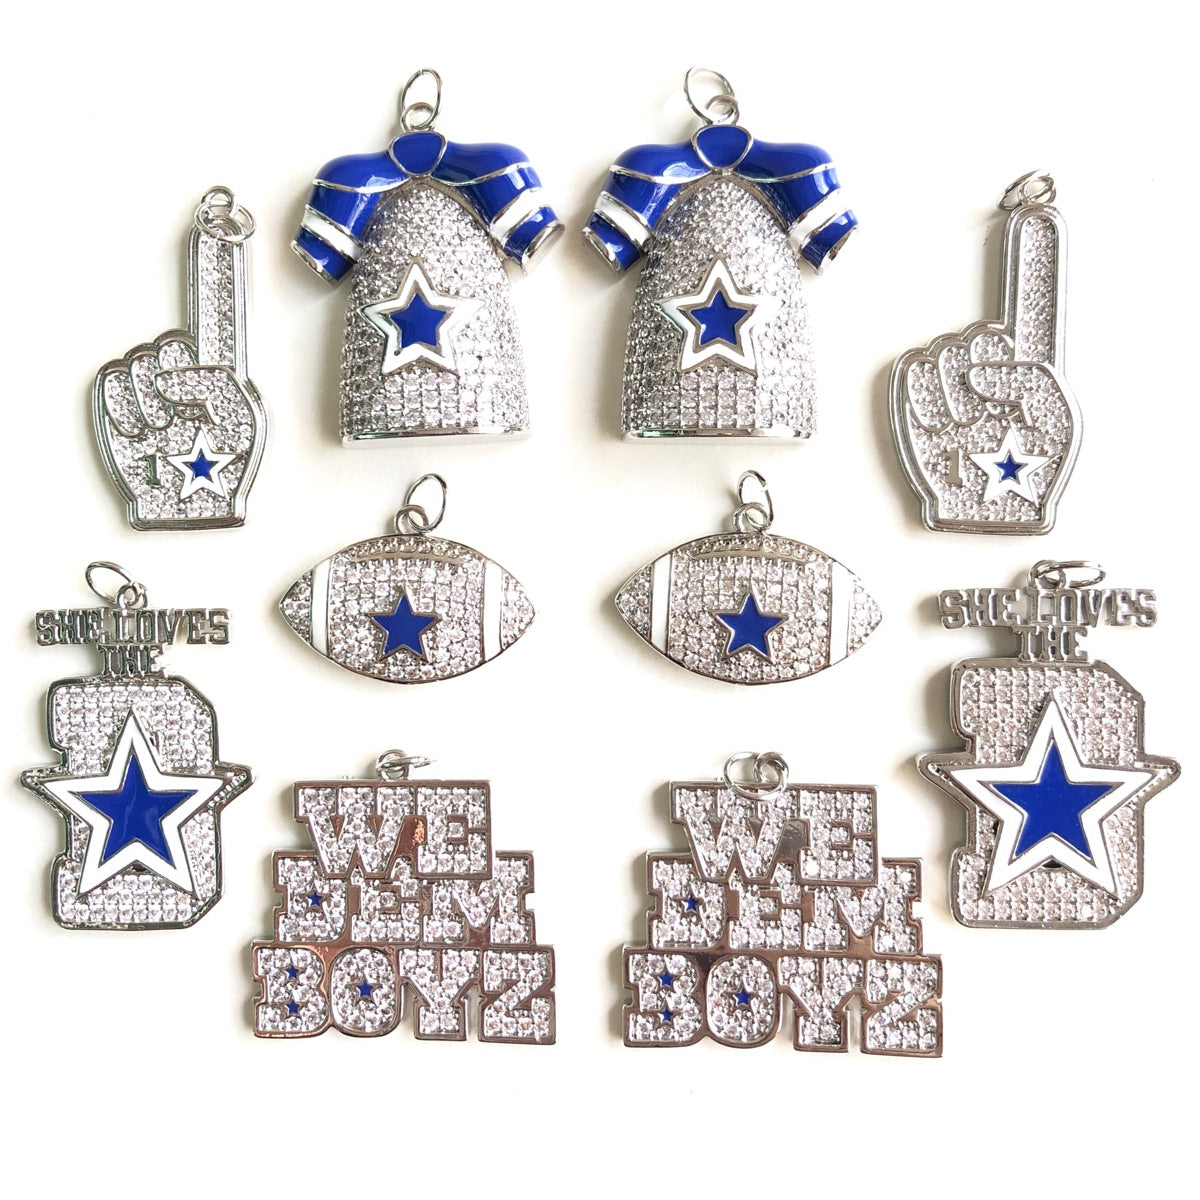 10pcs/Lot CZ Paved Cowboys American Football Charms Bundle Silver CZ Paved Charms American Football Sports Mix Charms New Charms Arrivals Charms Beads Beyond